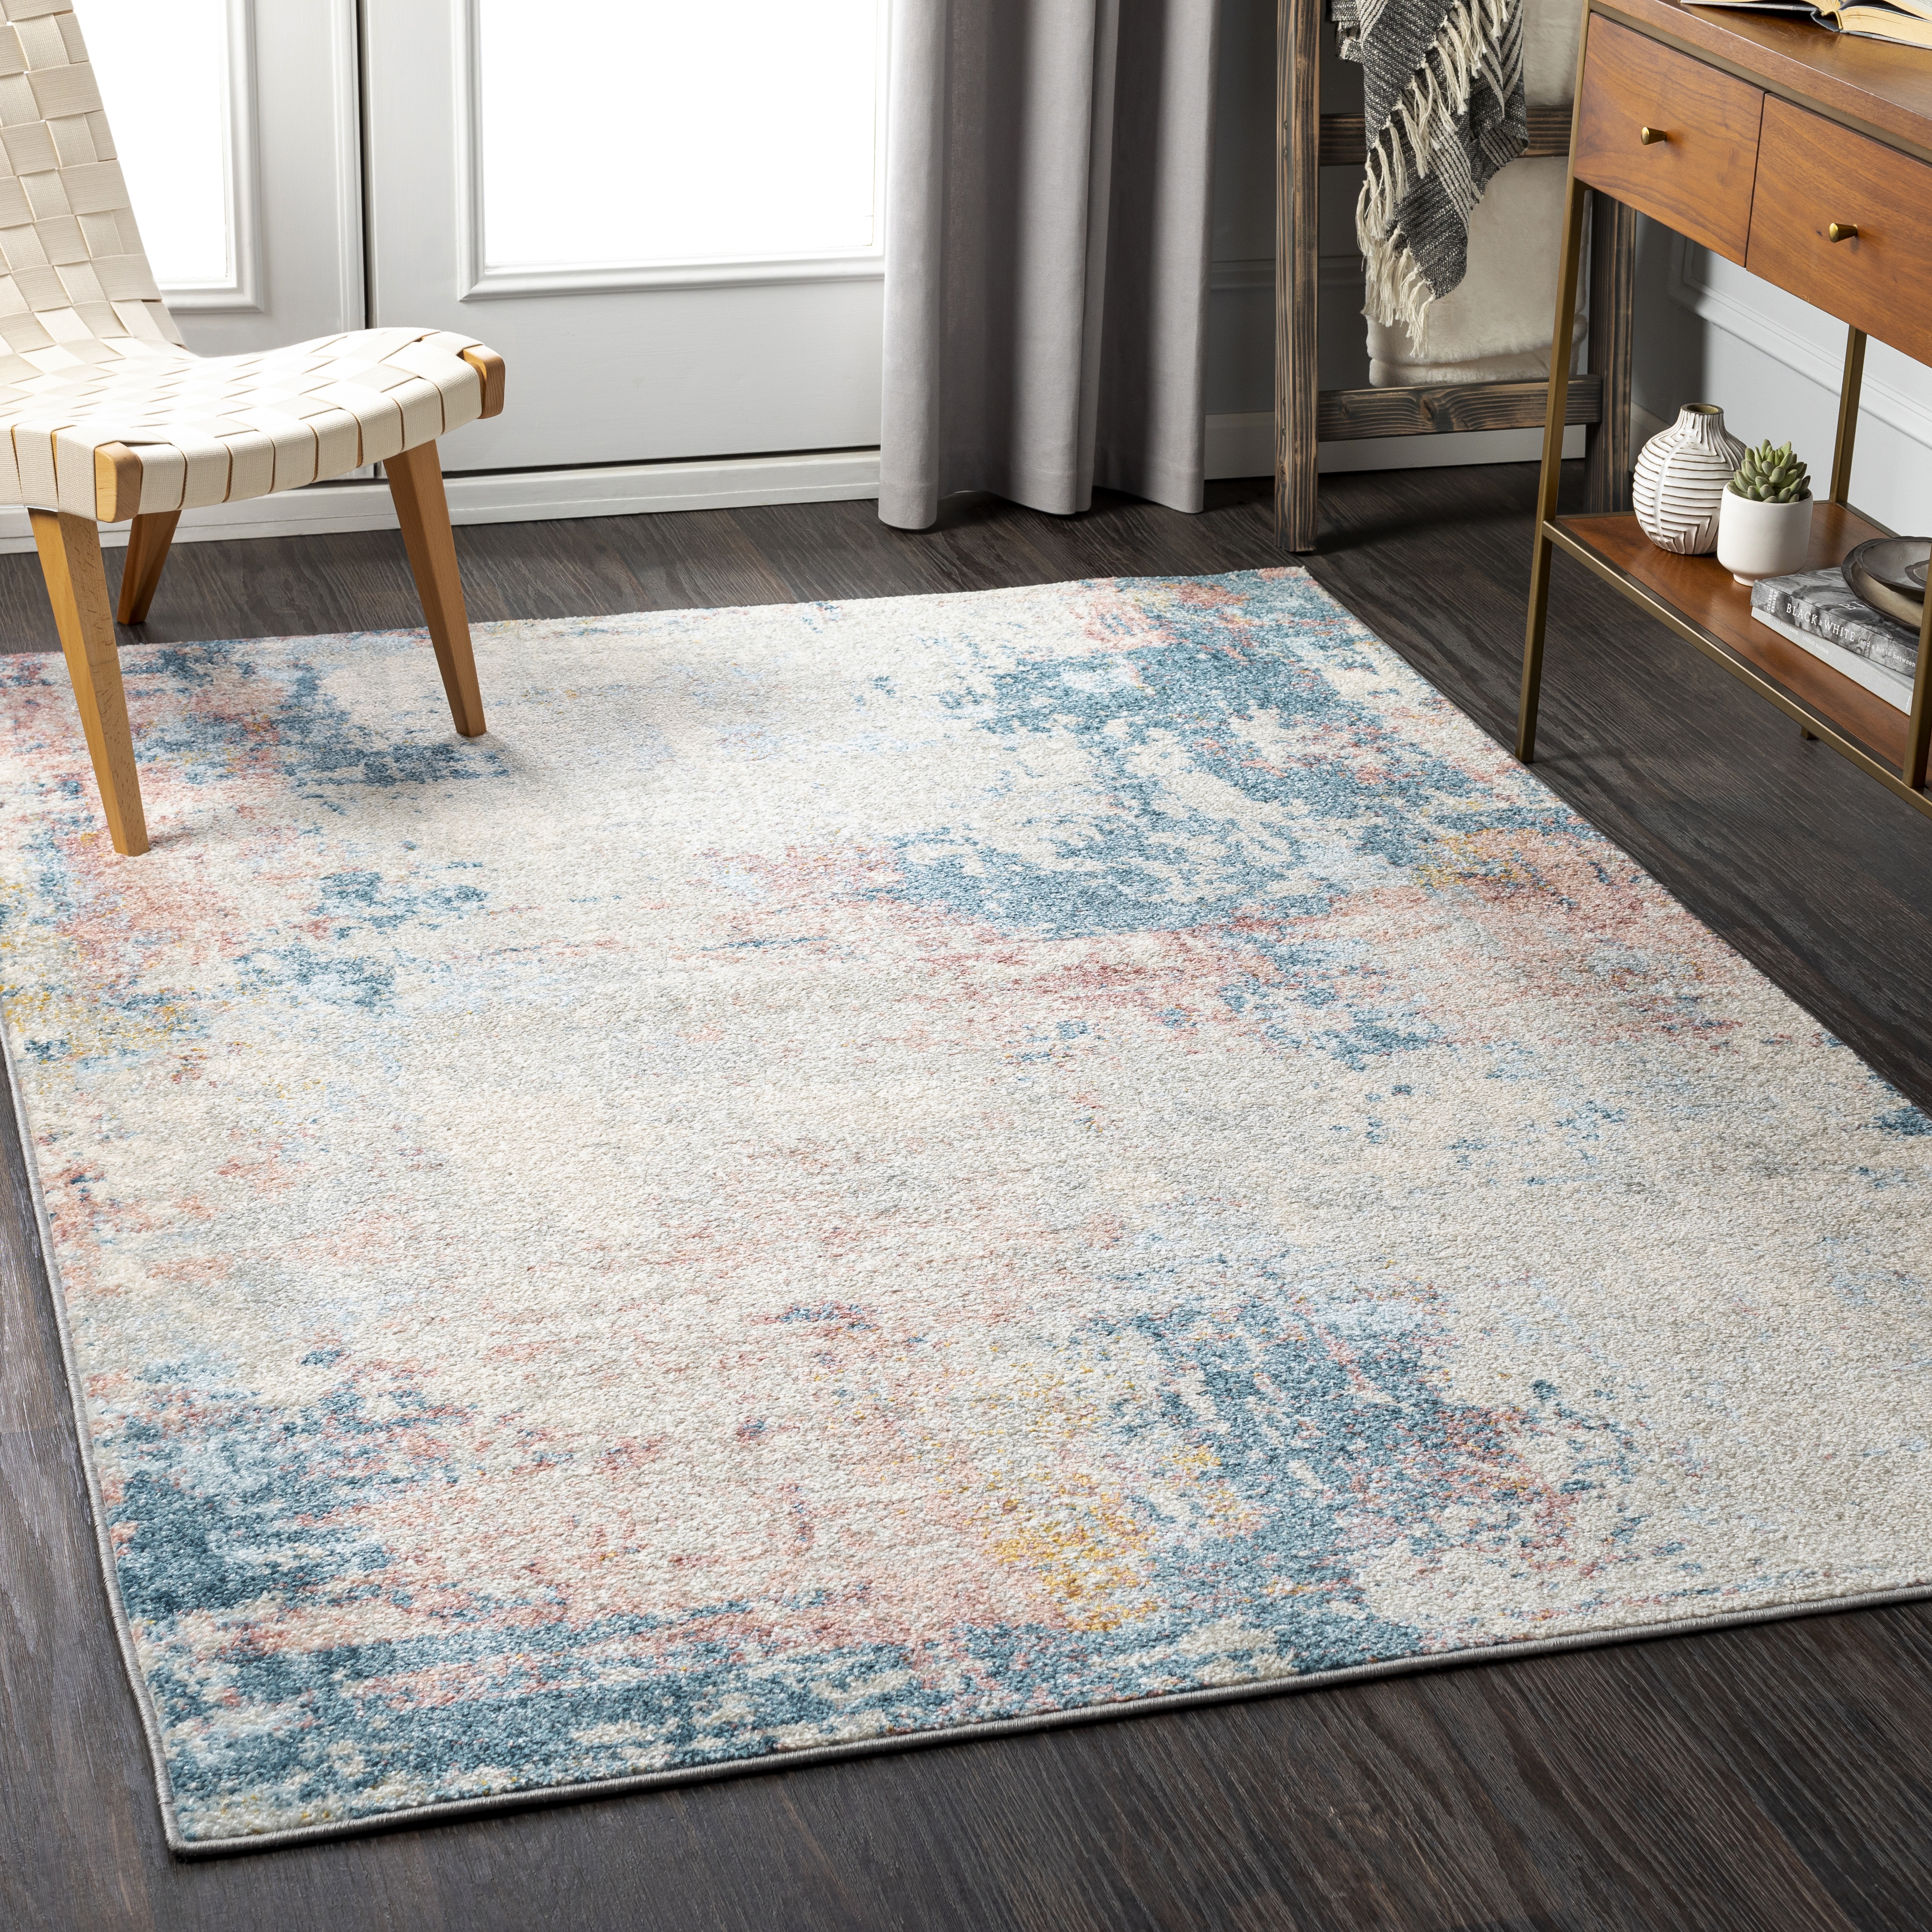 Chester Rug, 6'7" x 9' - Image 1